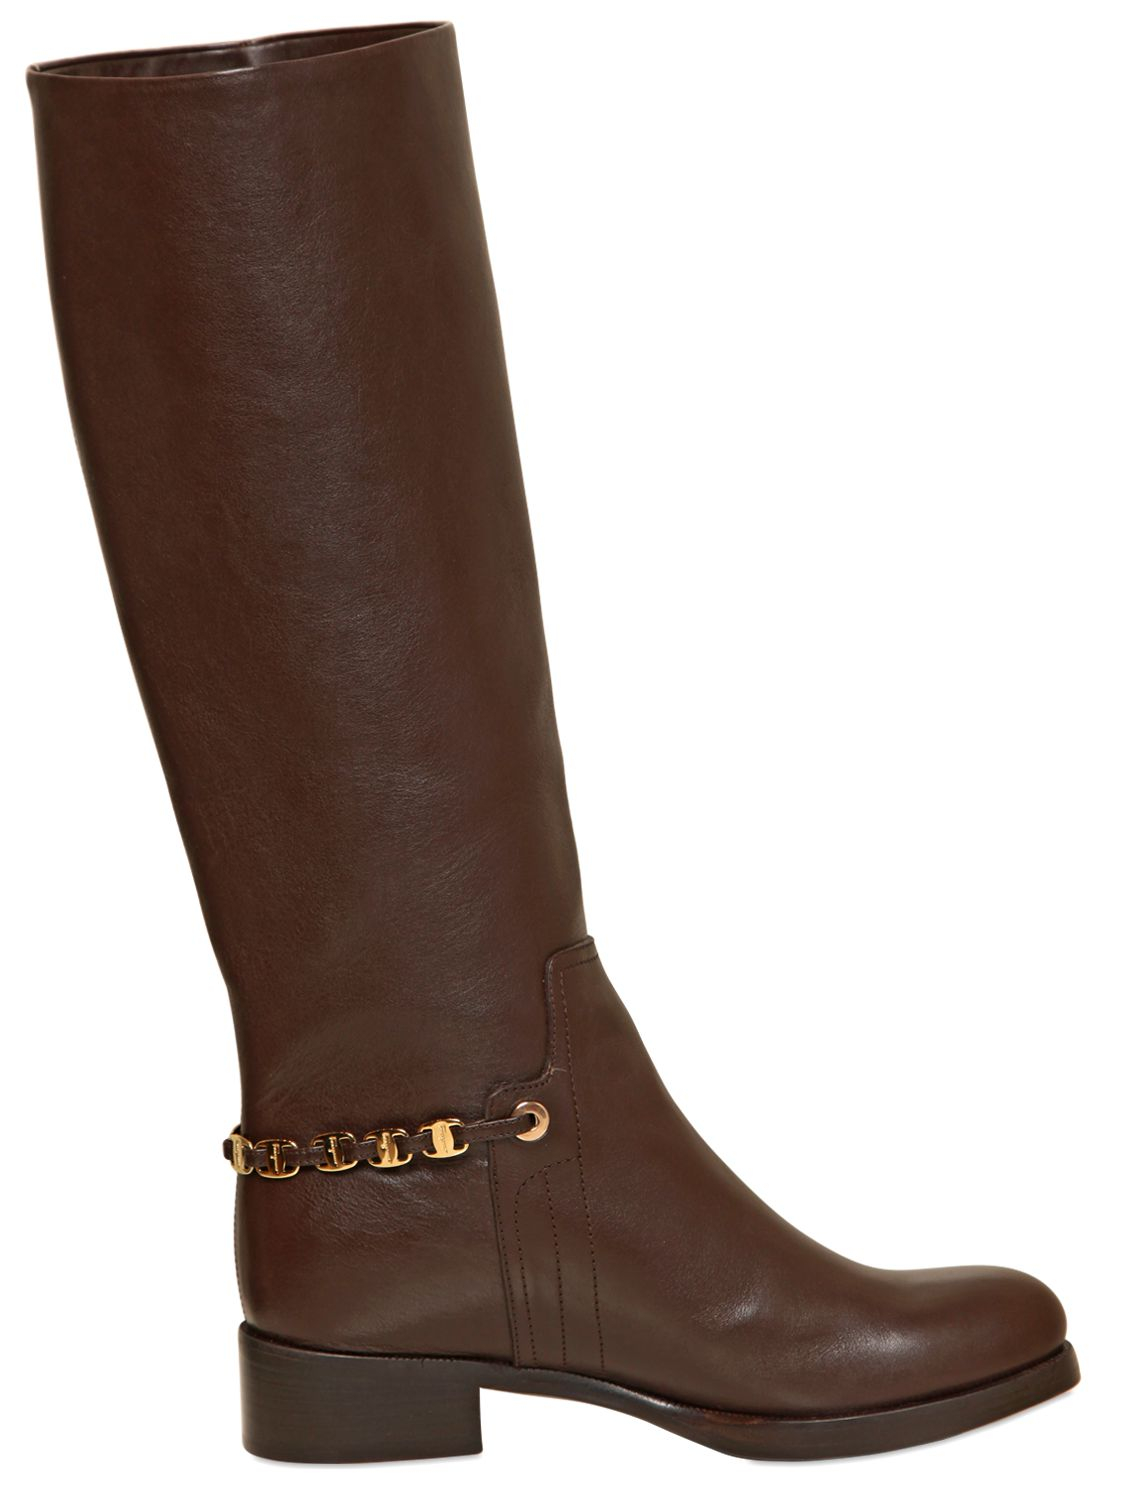 Ferragamo 20Mm Nando Leather Chained Boots in Brown - Lyst